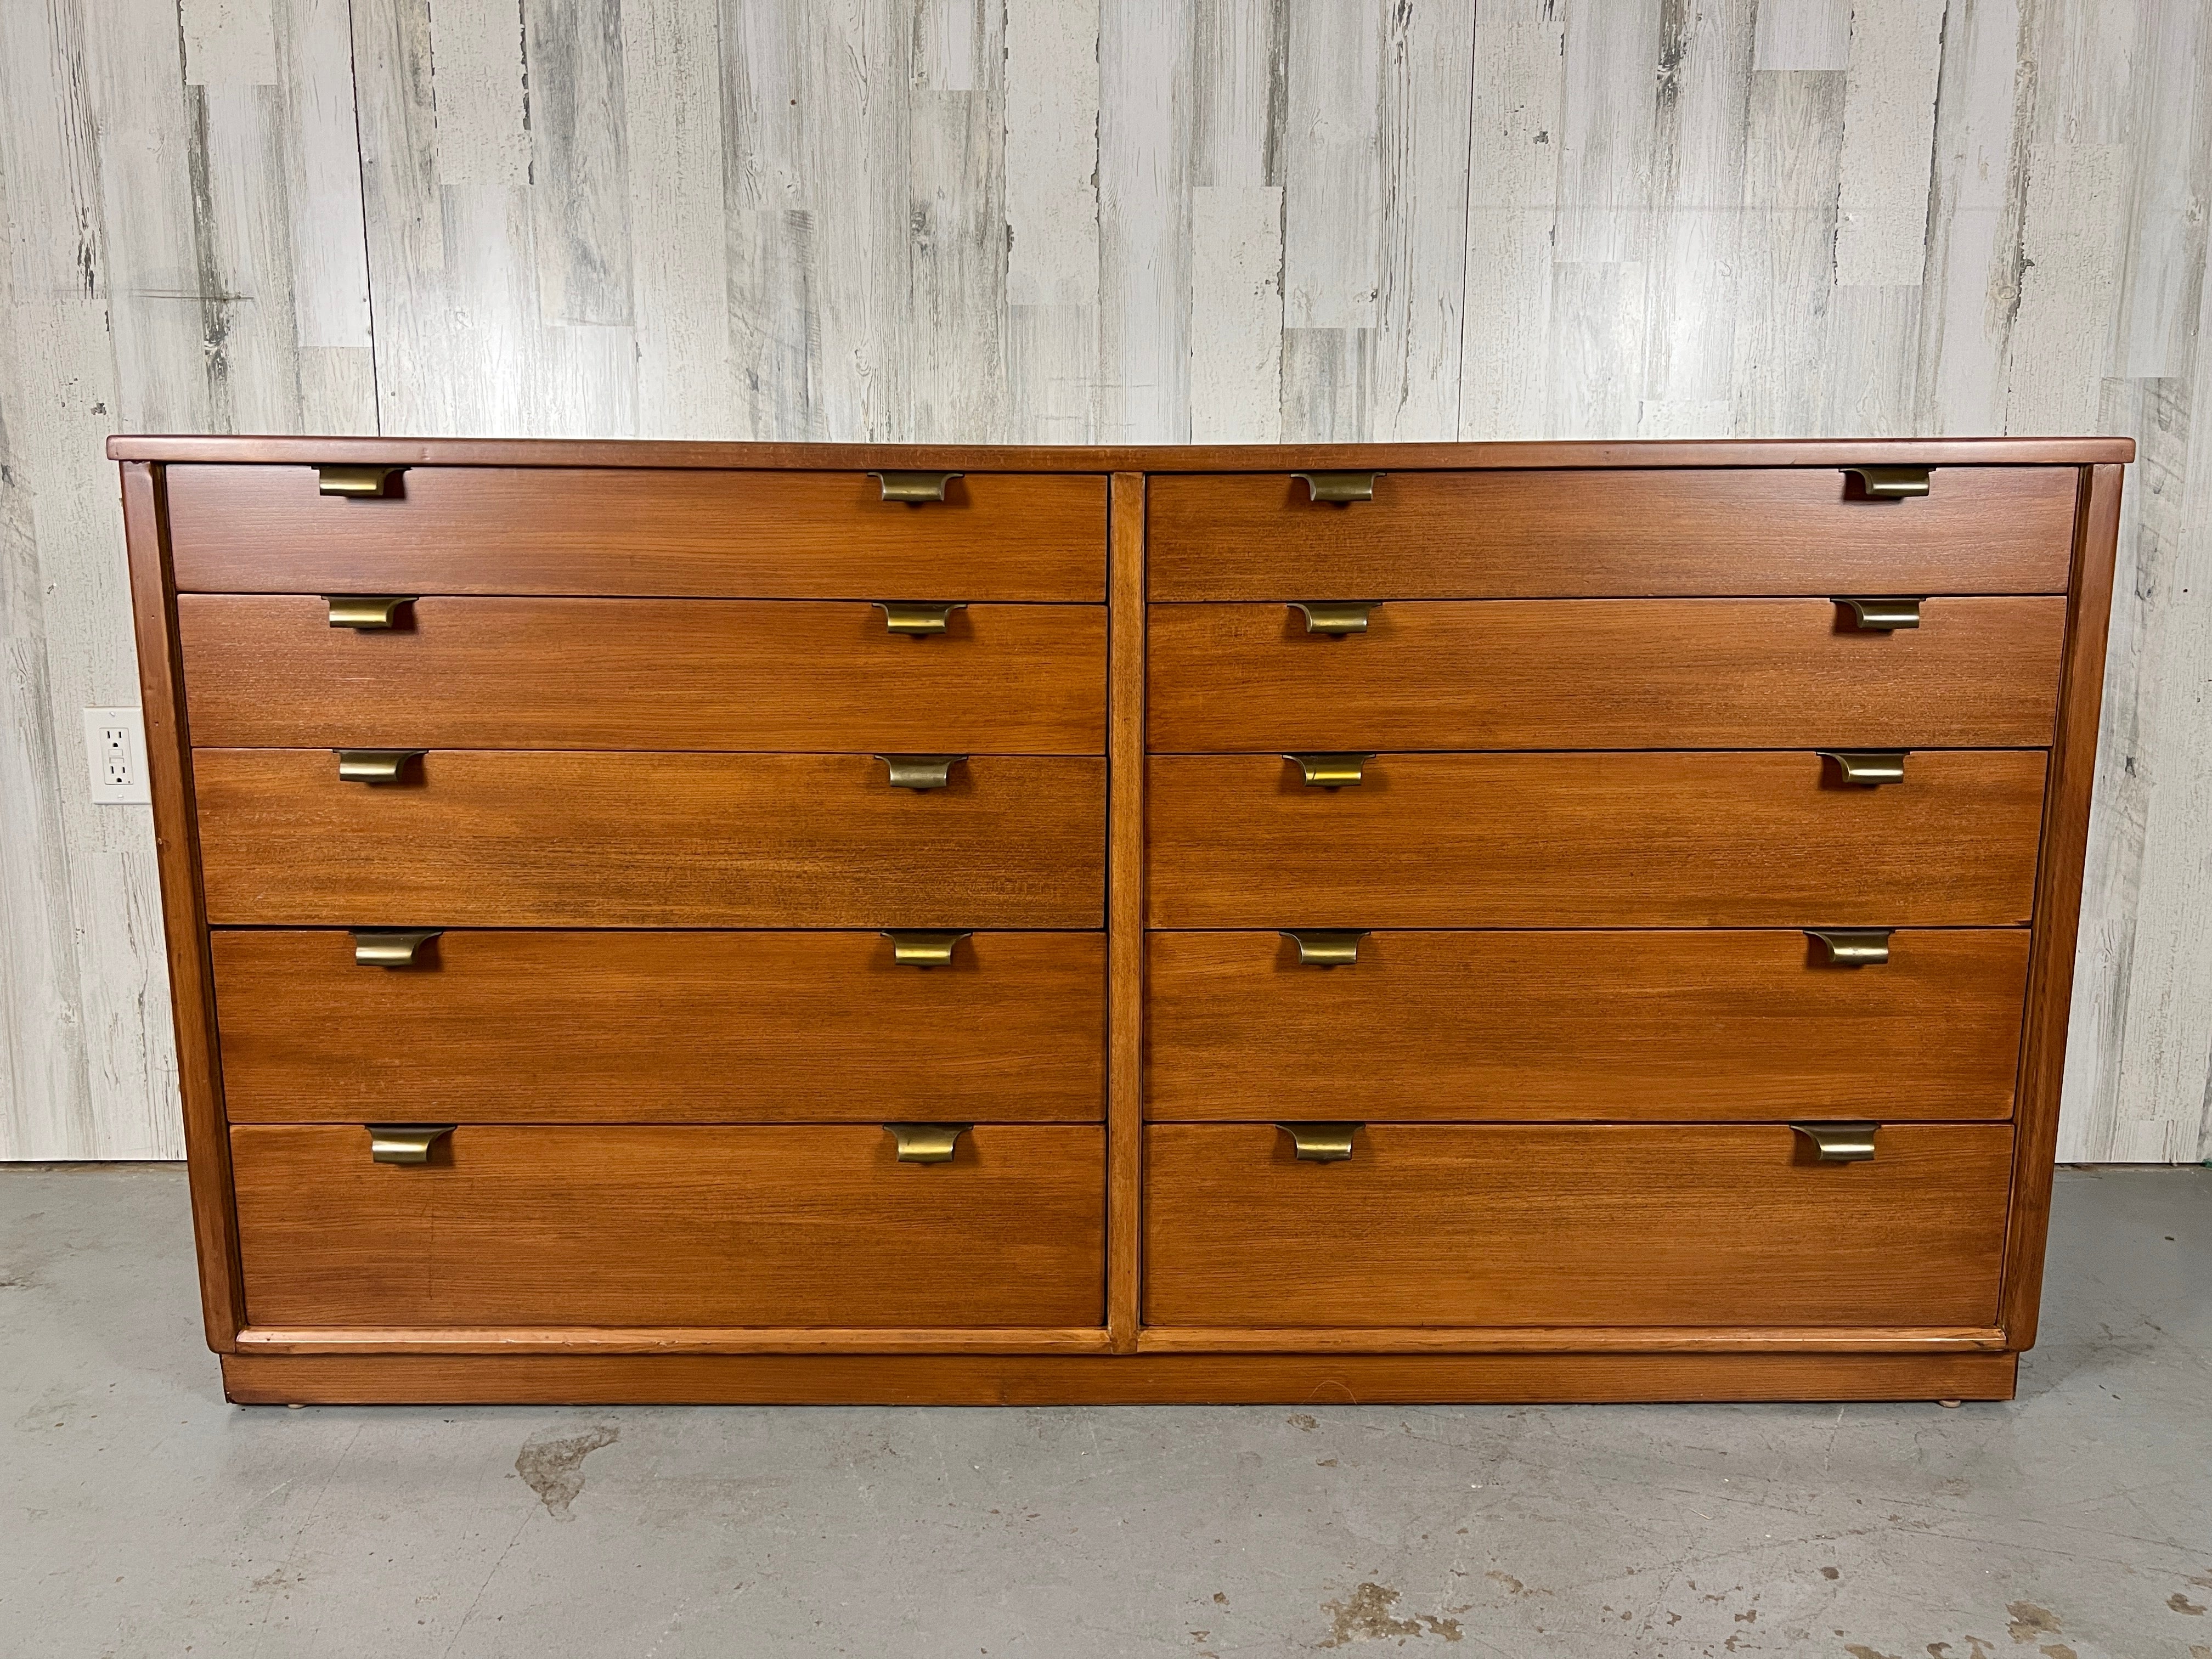 Edward Wormley for Drexel for their Precedent furniture line. The dresser is made of stained elm with original solid brass hardware.